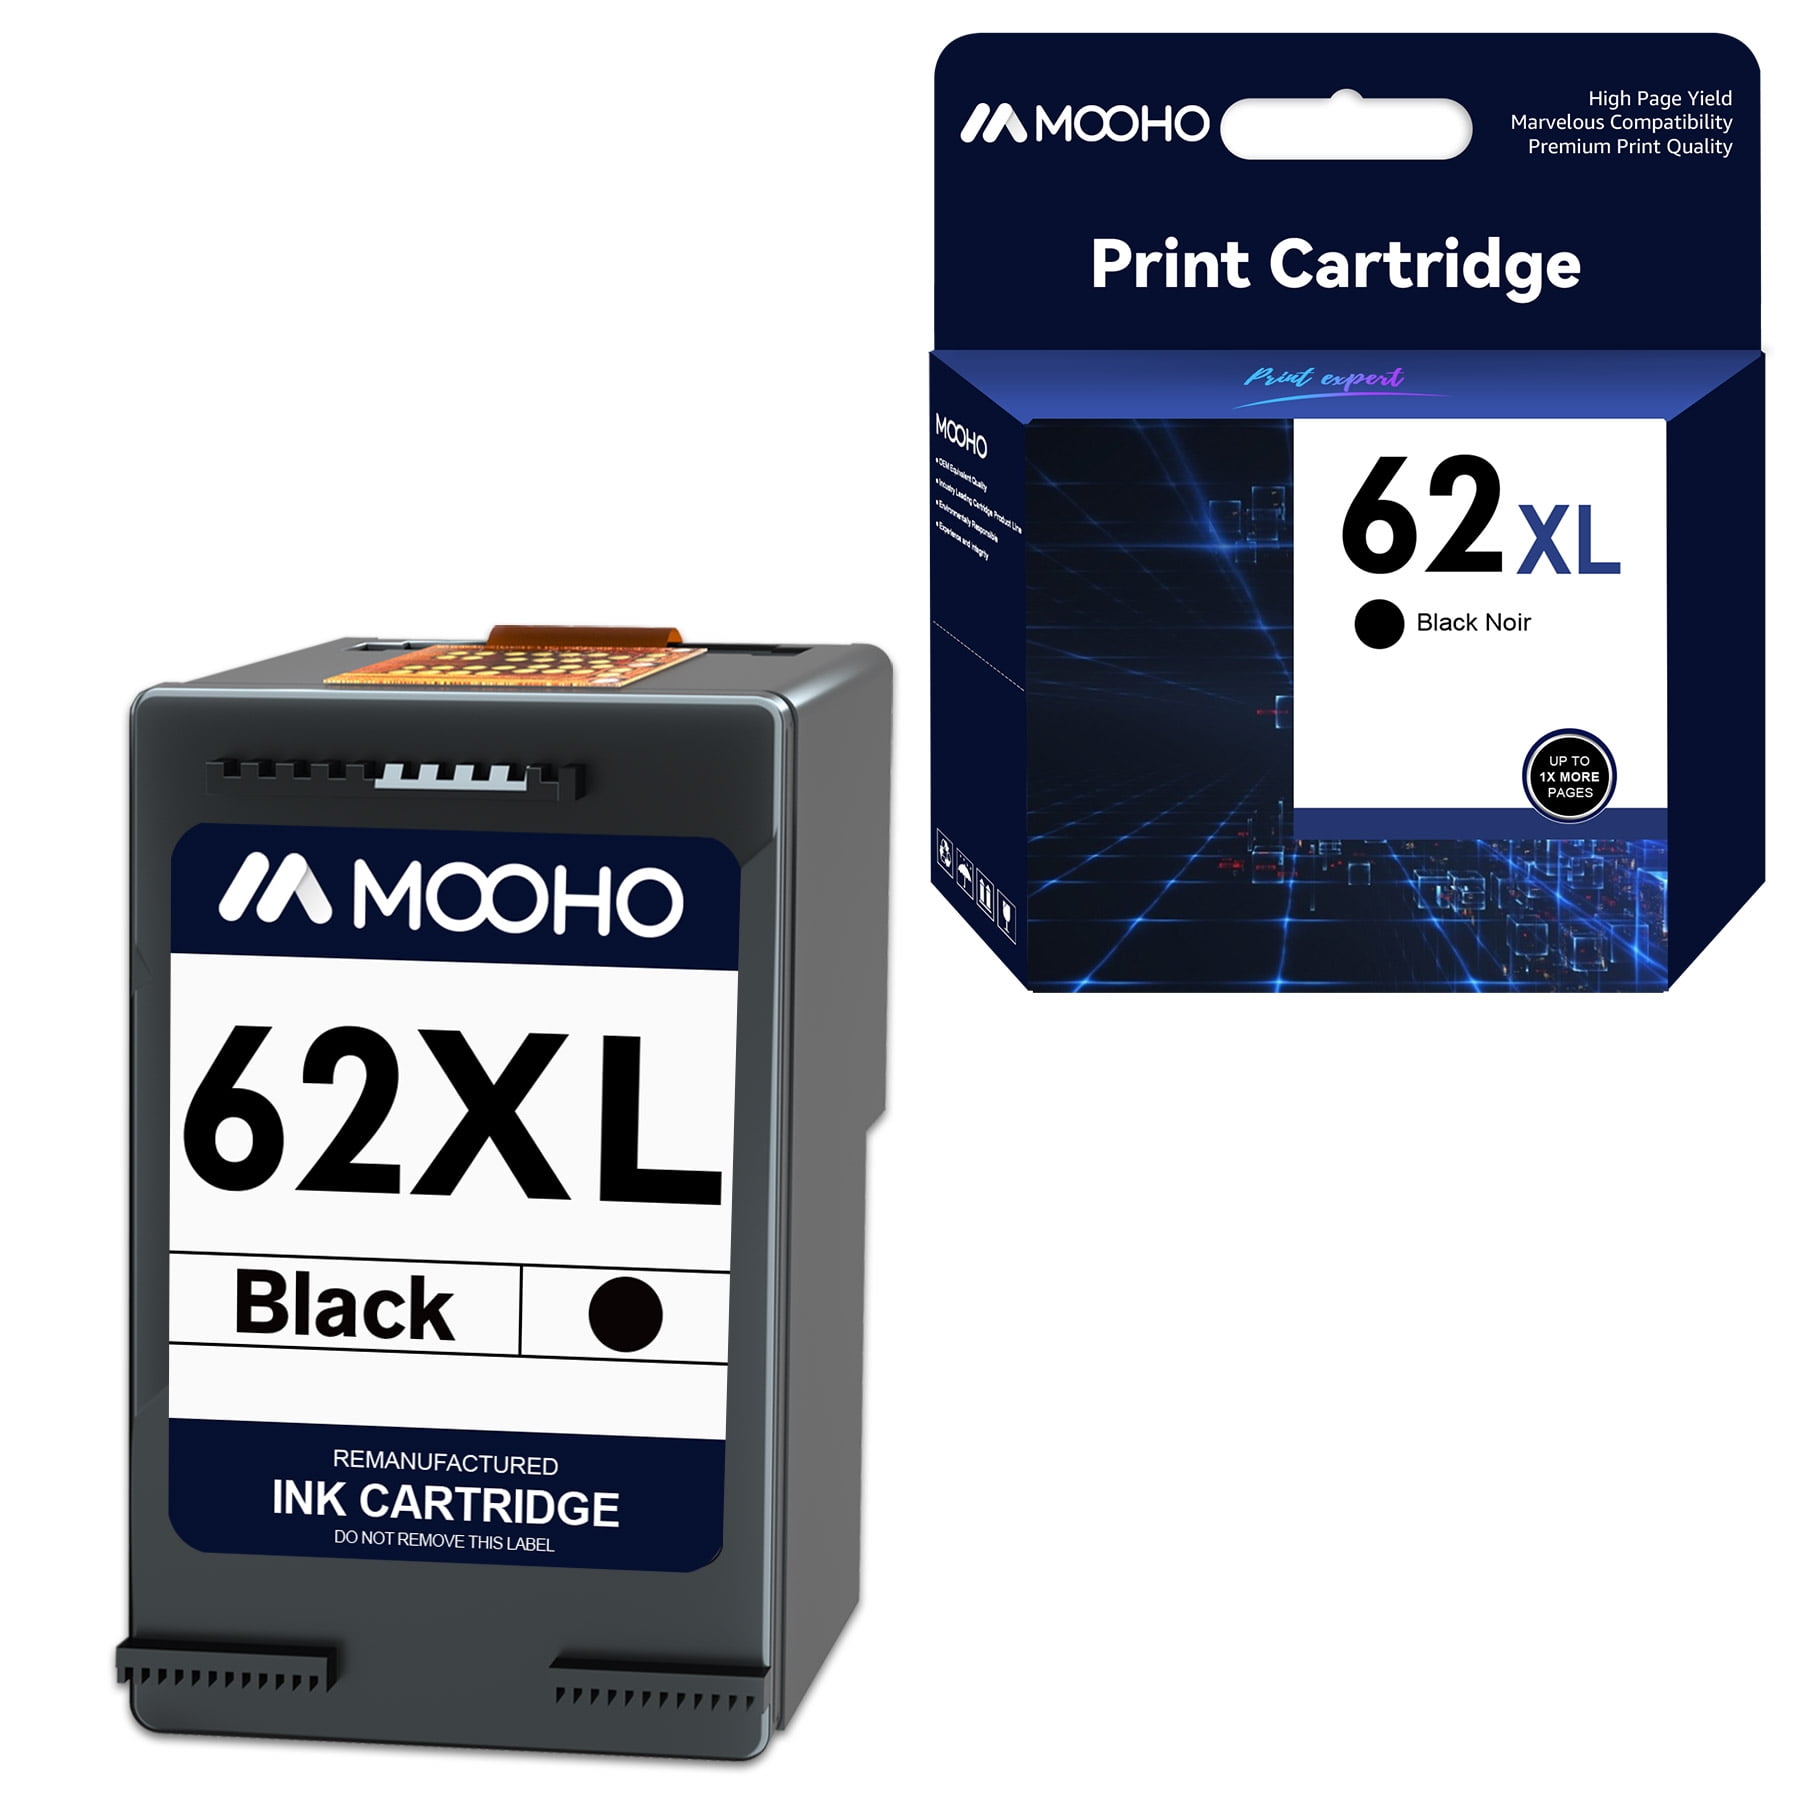 HP 62 Tri-color Ink Cartridge | Works with HP ENVY 5540, 5640, 5660, 7640  Series, HP OfficeJet 5740, 8040 Series, HP OfficeJet Mobile 200, 250 Series